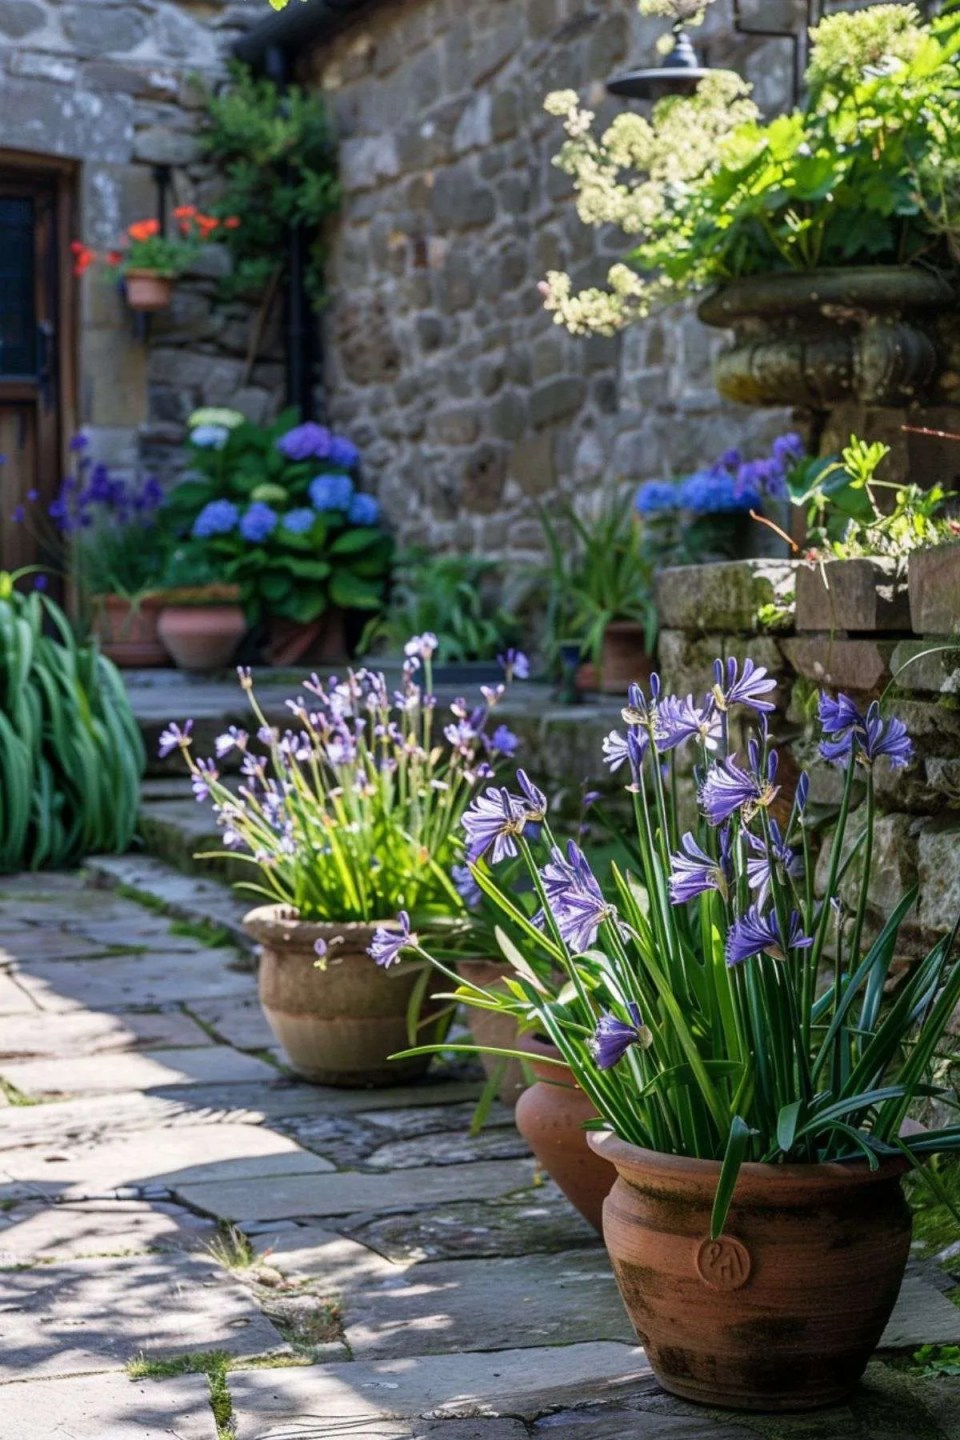 flowers in terracotta pots on a stone path in a rustic style garden